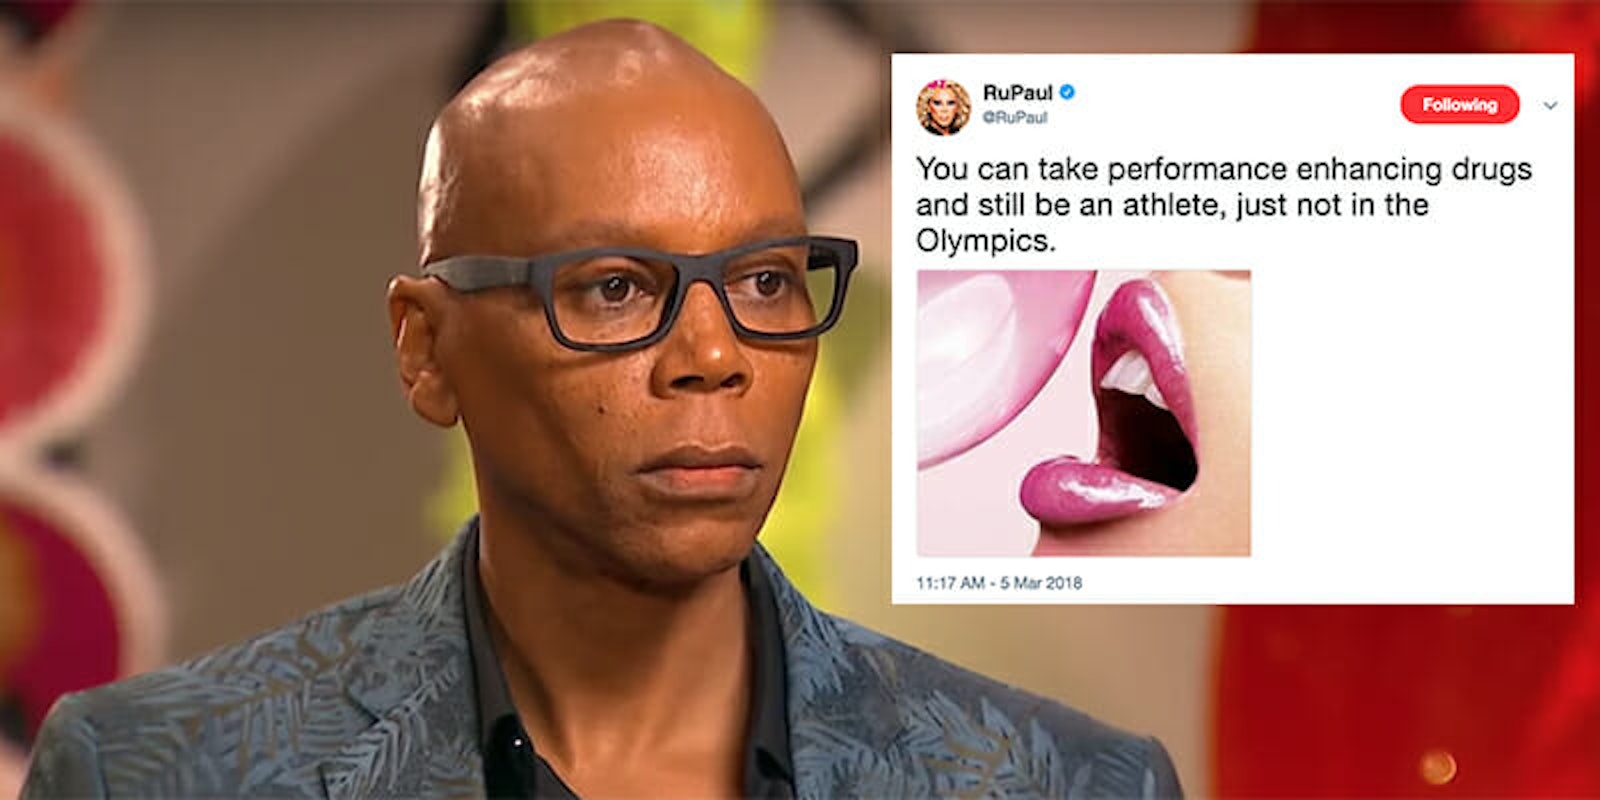 RuPaul Charles doubled down on his statement that he would 'probably not' allow a fully transitioned woman to compete on 'RuPaul's Drag Race.'